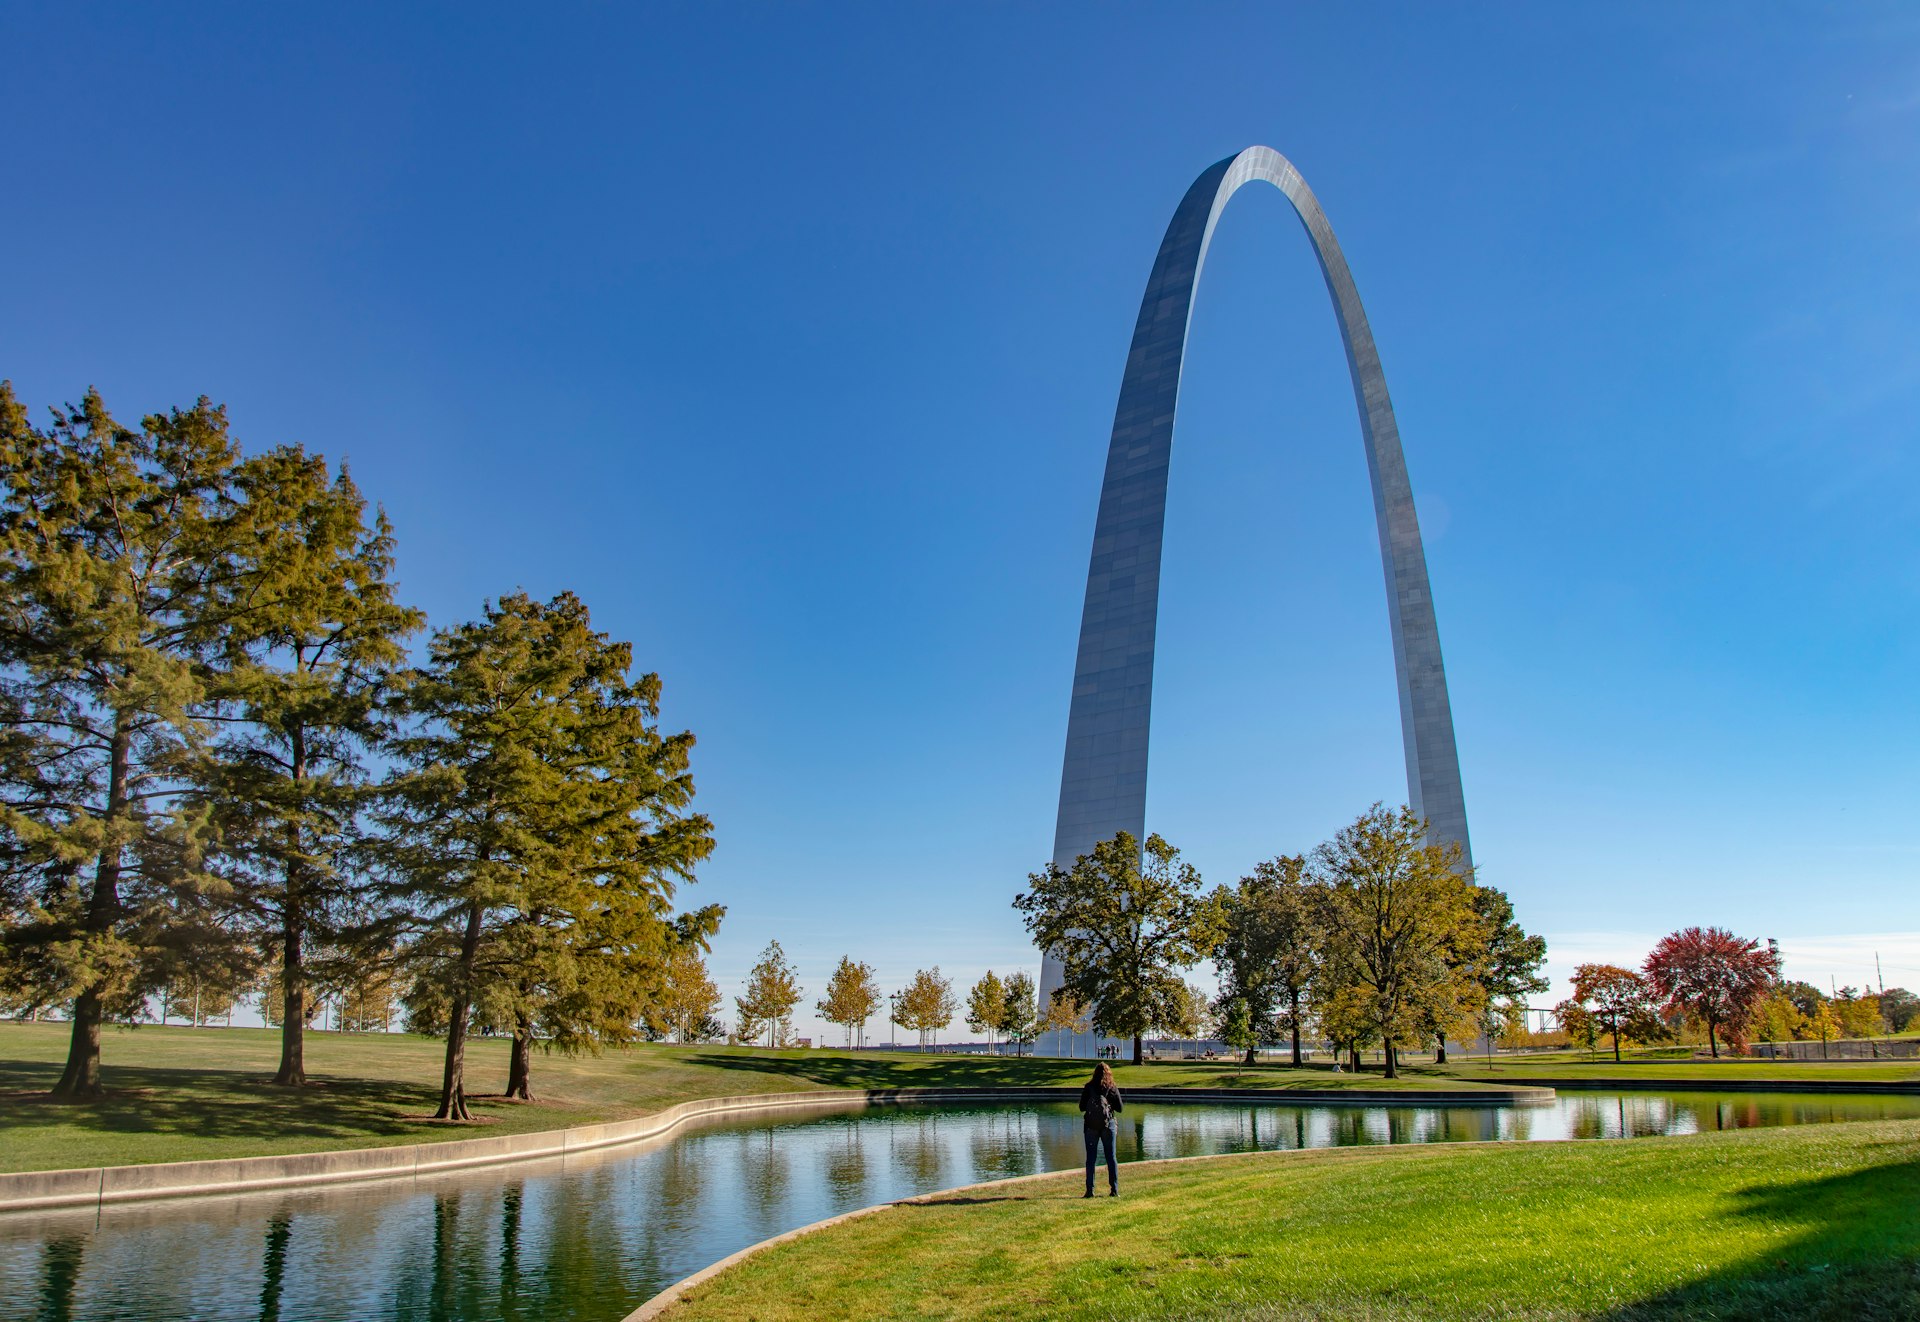 The St Louis Gateway Arch seen from the green spaces of Gateway Arch National Park